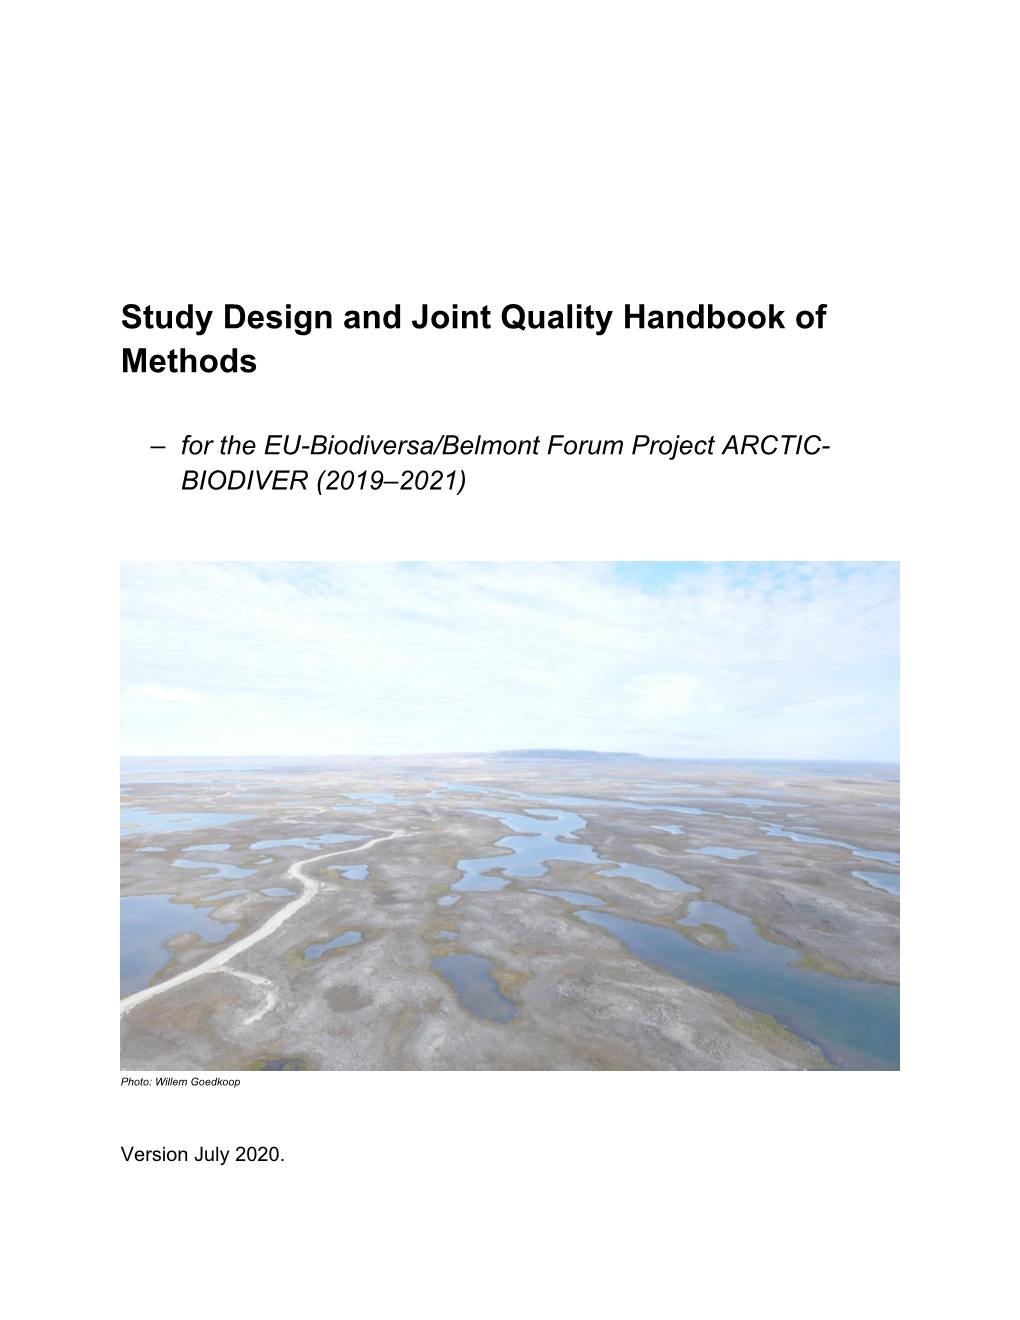 Study Design and Joint Quality Handbook of Methods